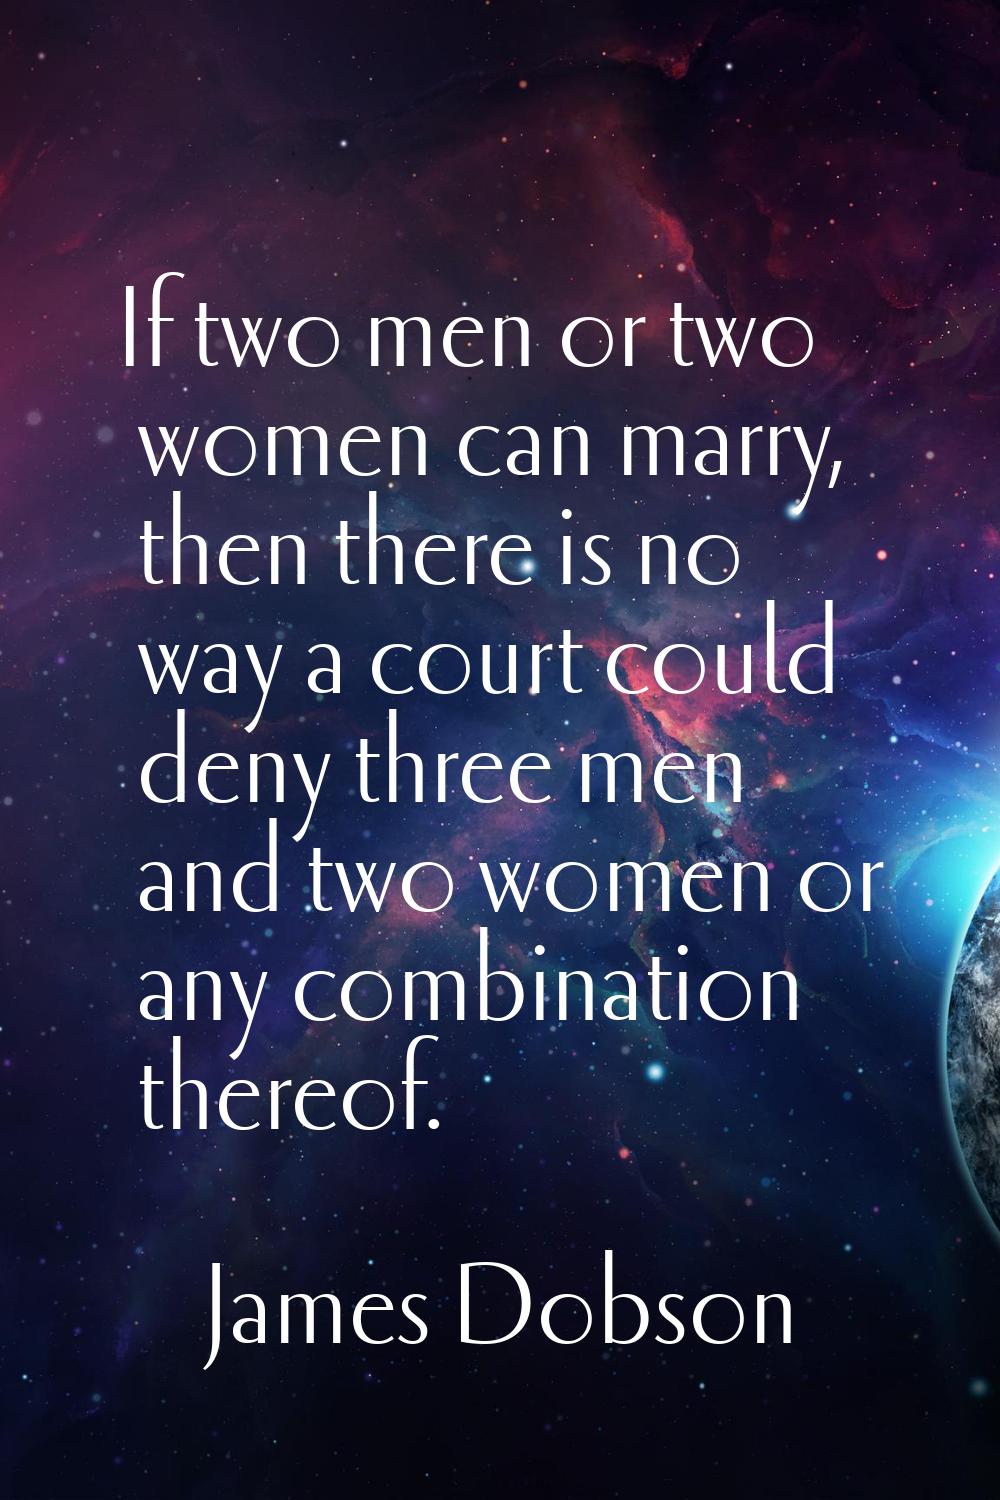 If two men or two women can marry, then there is no way a court could deny three men and two women 